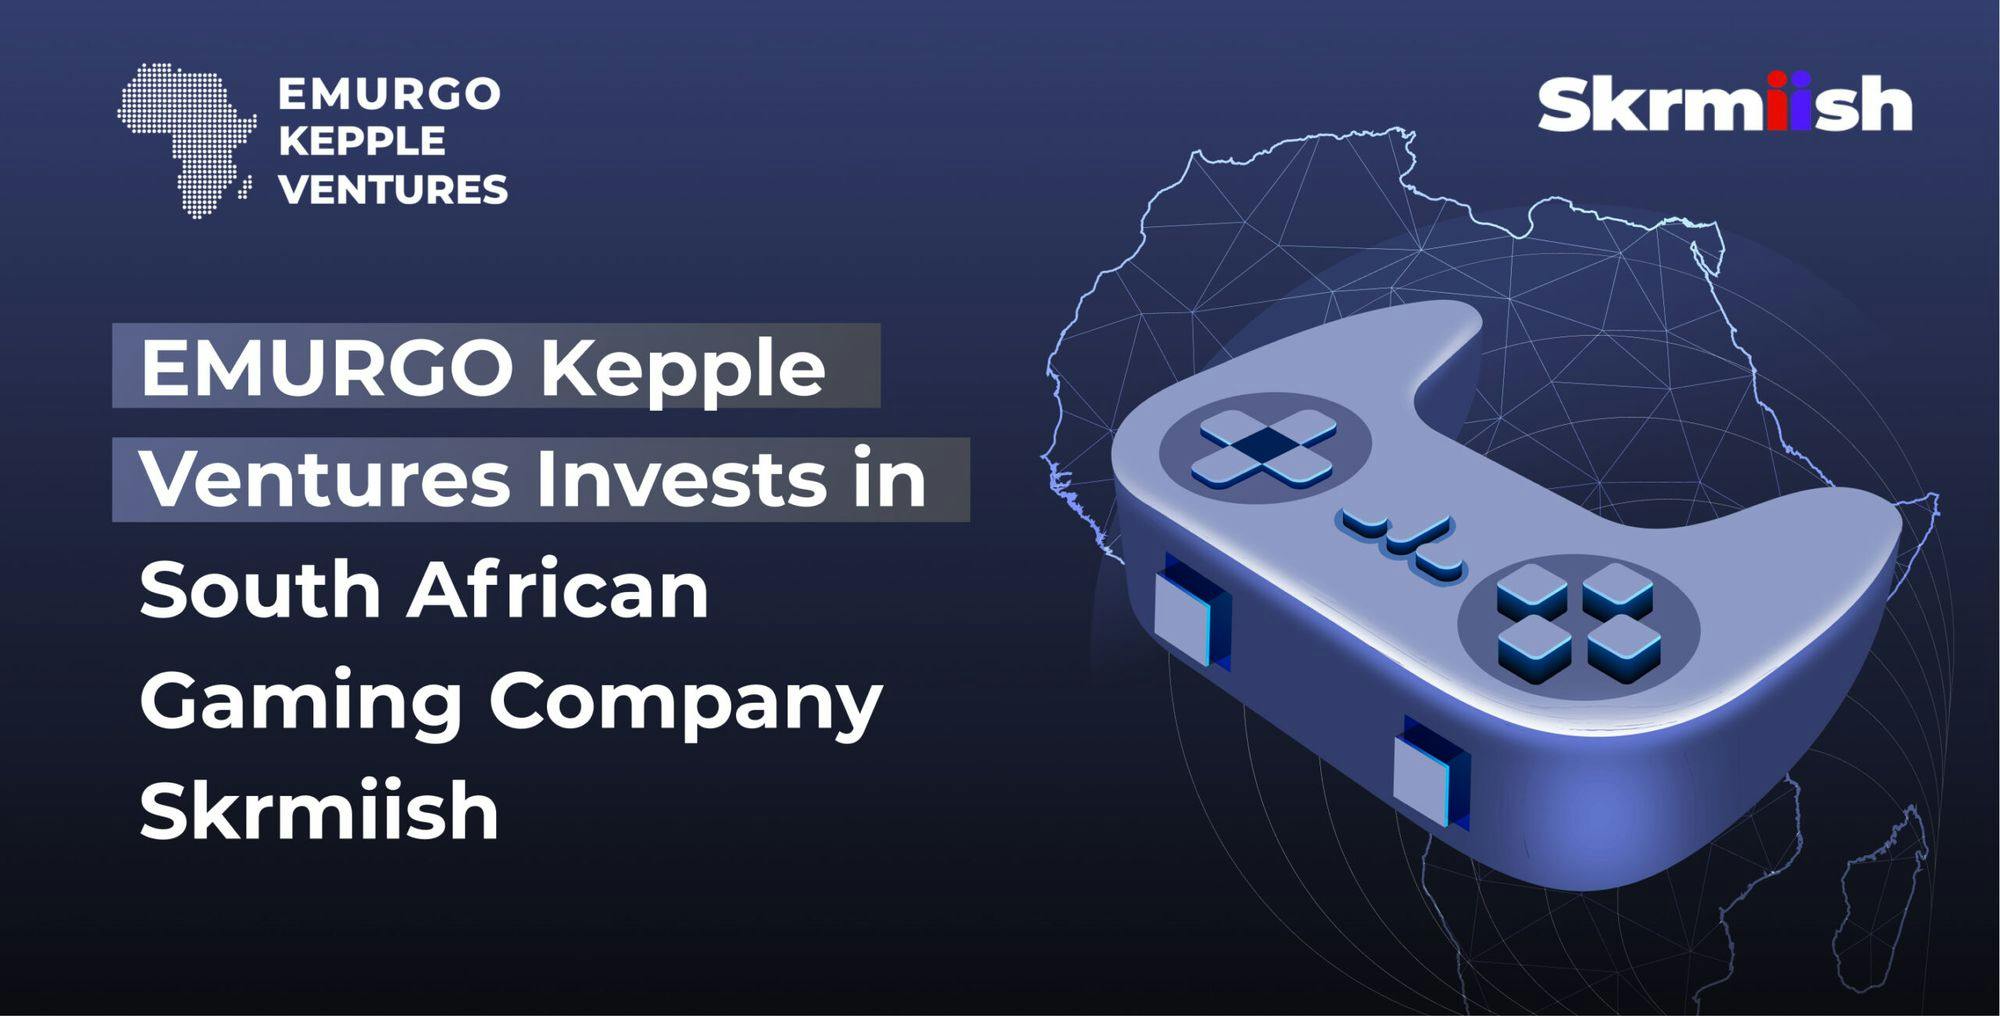 EMURGO Kepple Ventures Invests in South African Gaming Company Skrmiish